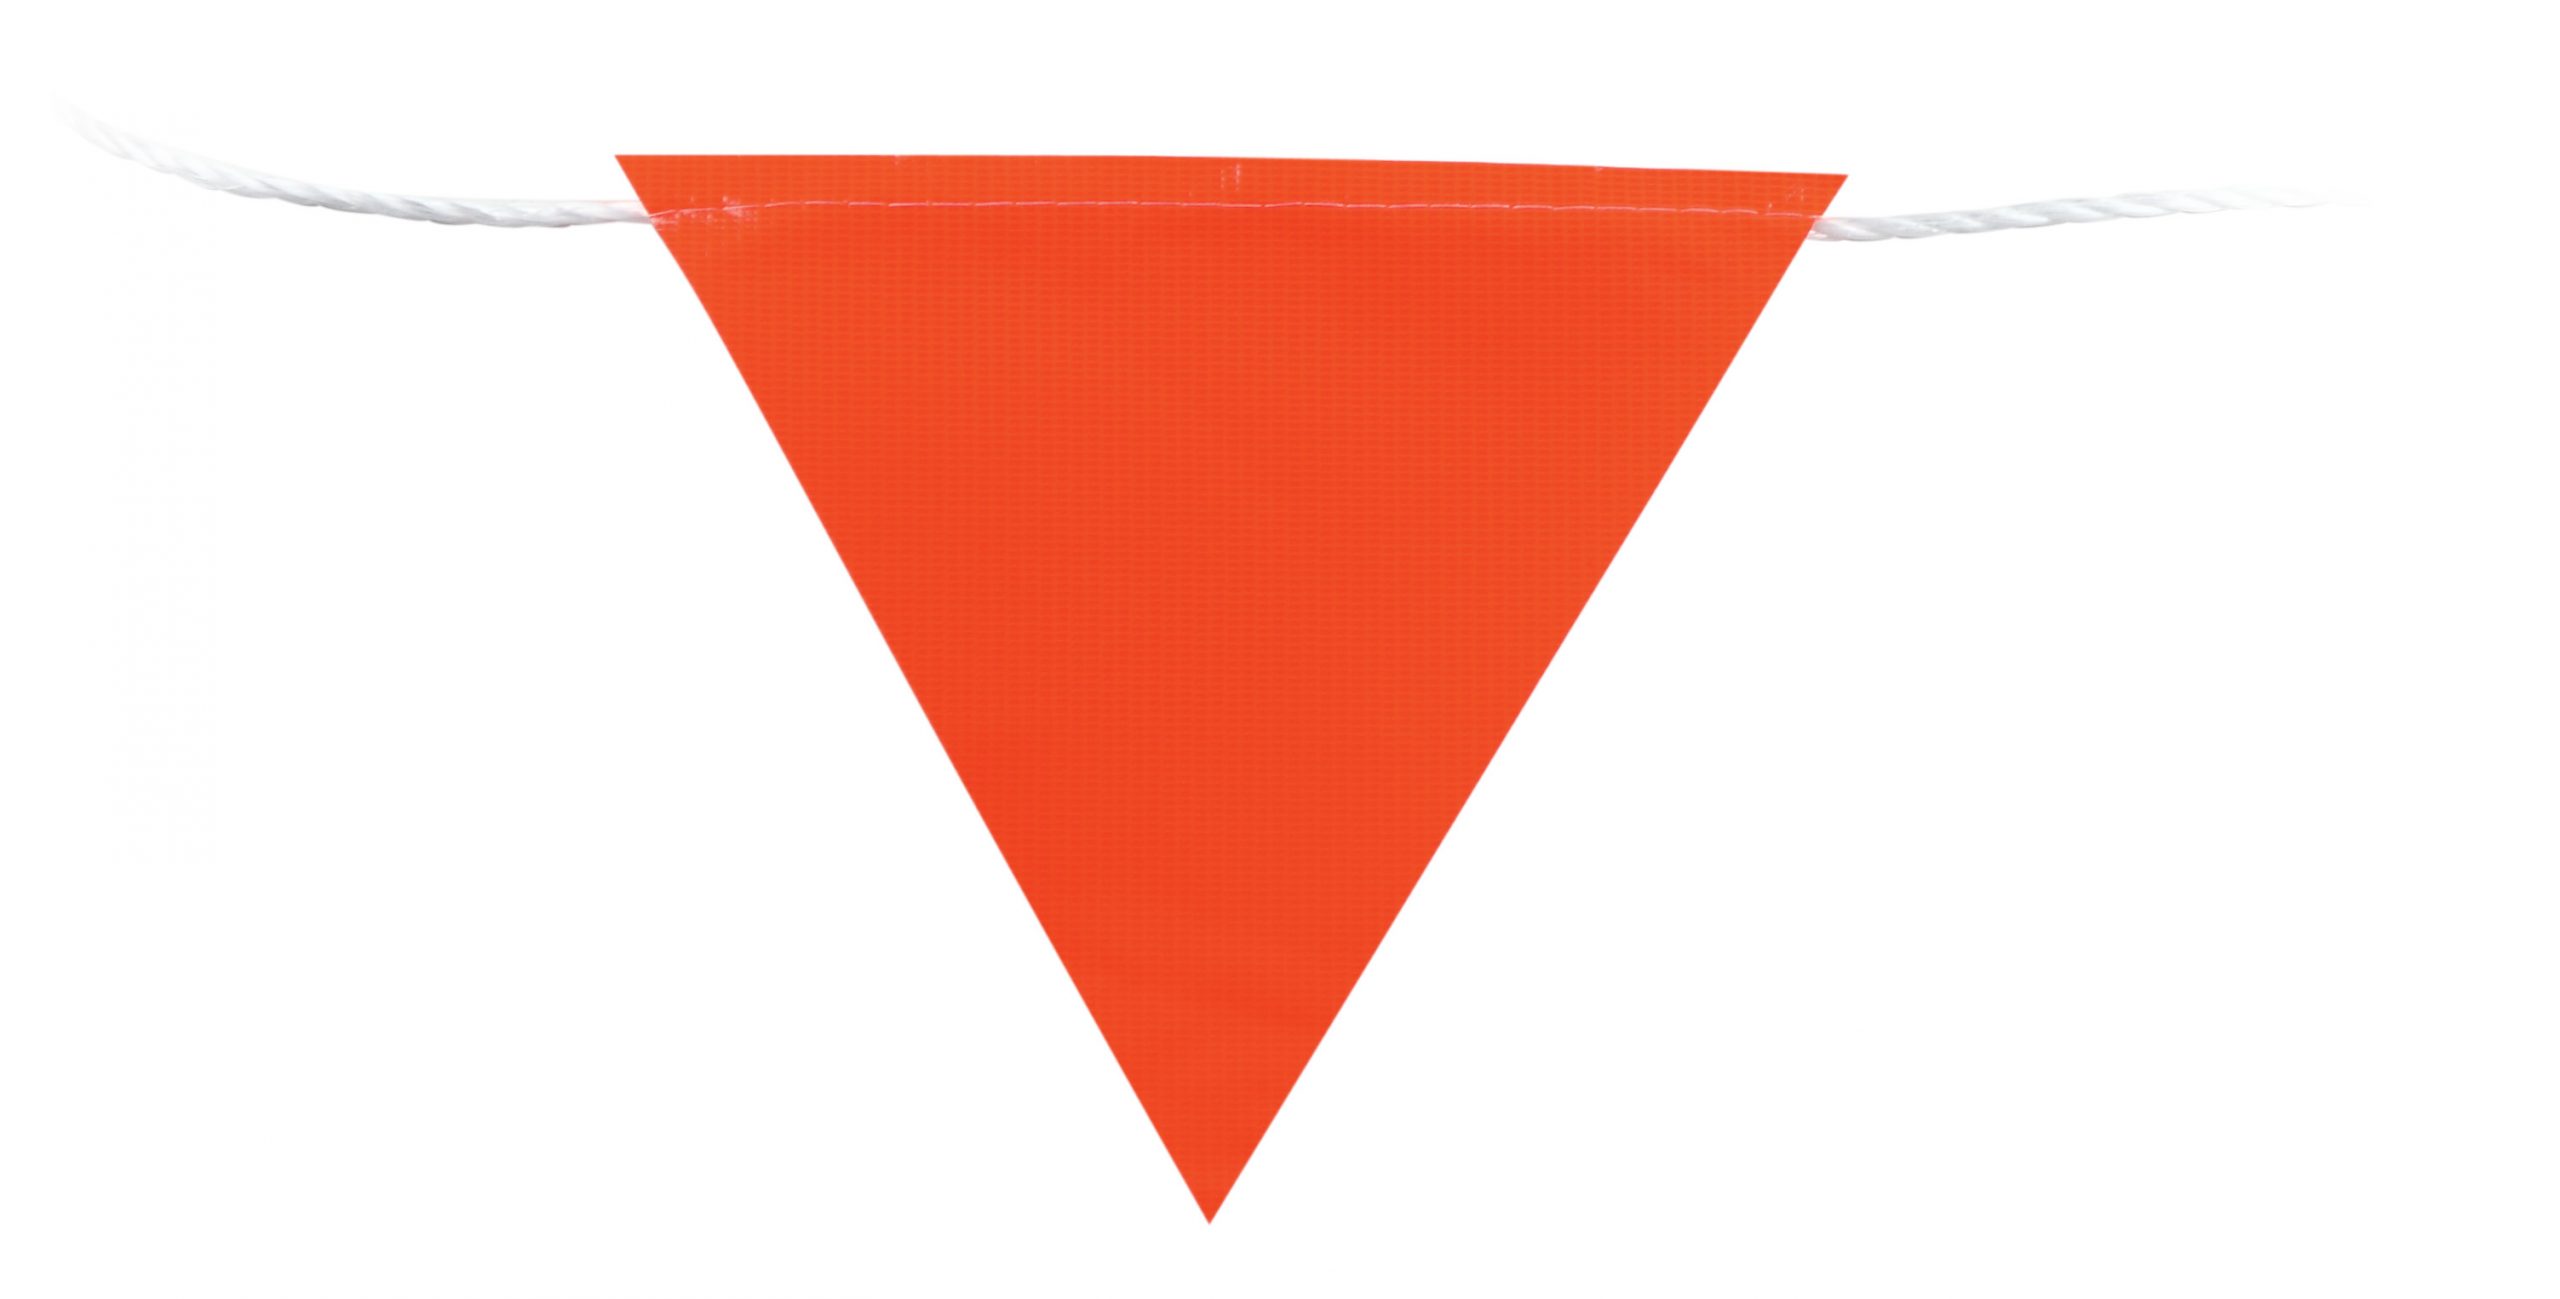 Bunting 30m Length Orange Flagging Safety Flags CARTON OF 25 AUTH DEALER